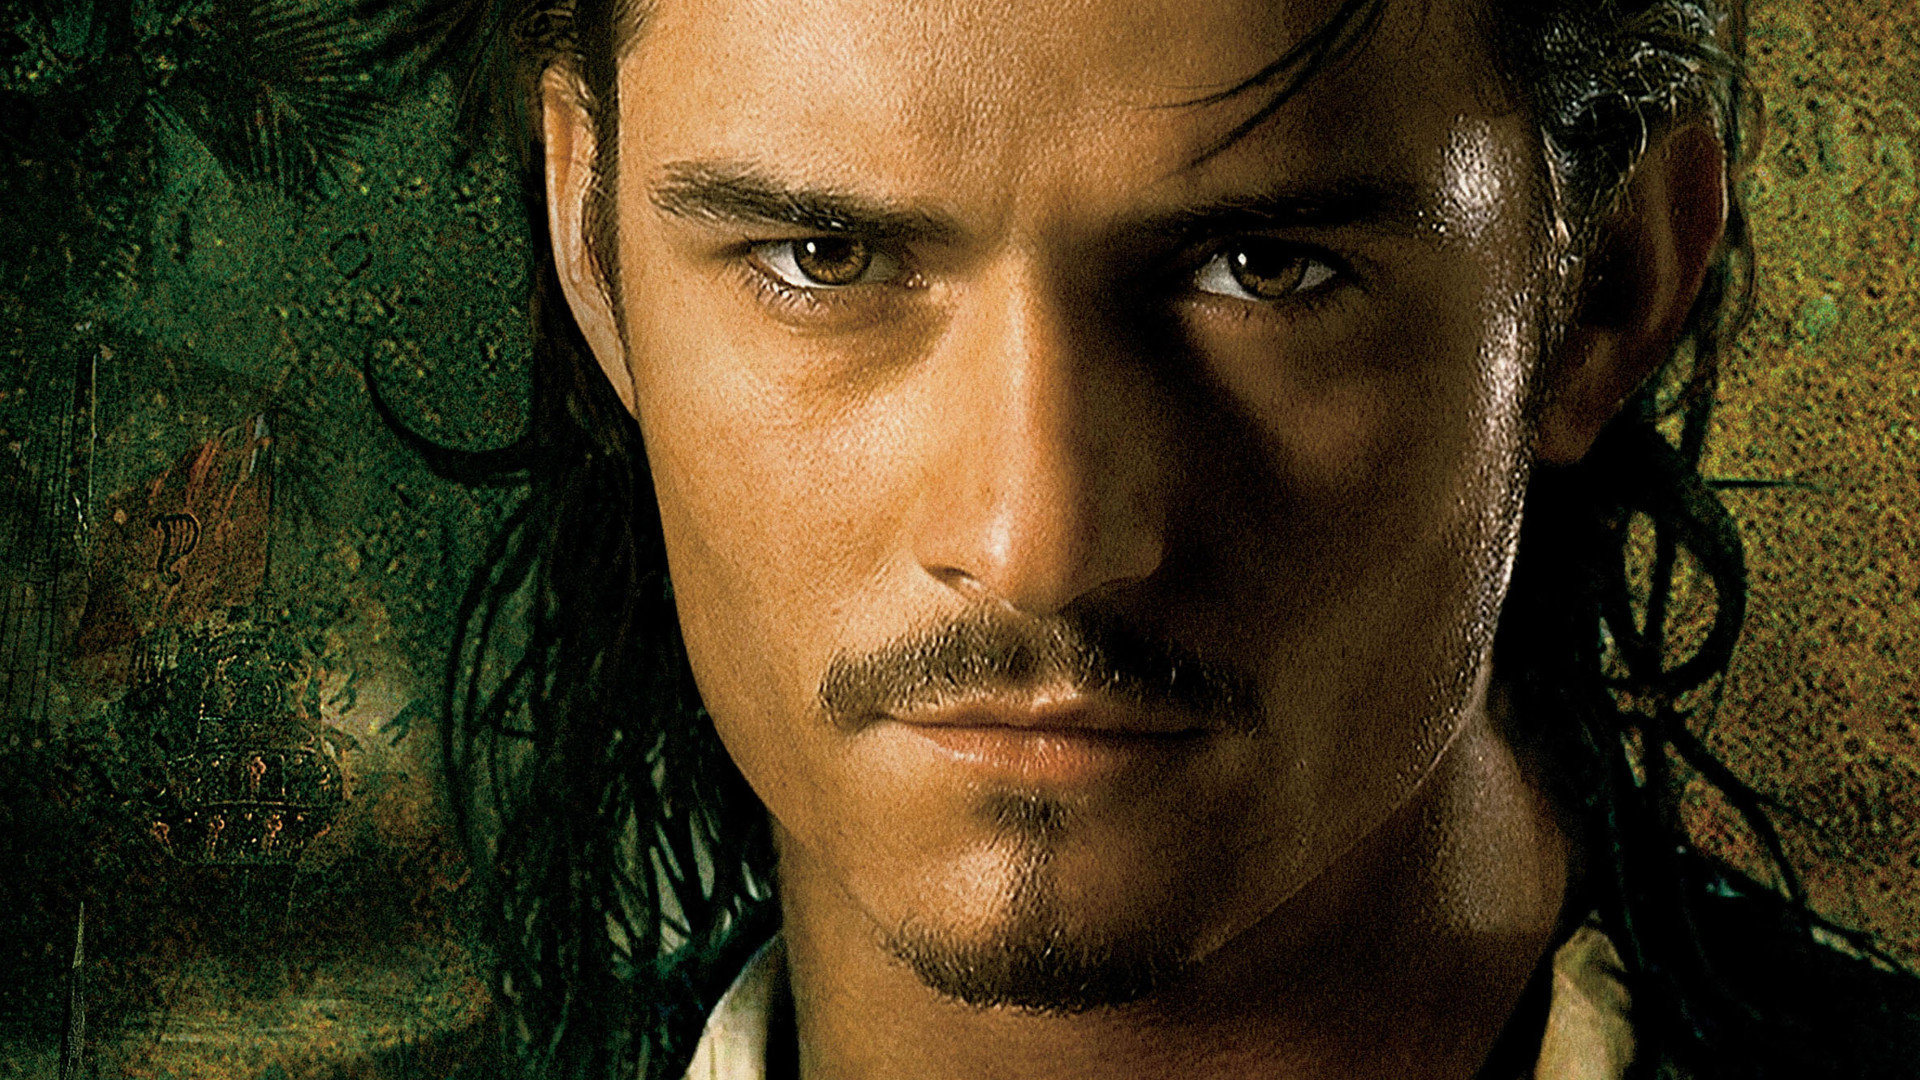 Best Pirates Of The Caribbean: Dead Man's Chest wallpaper ID:187943 for High Resolution hd 1920x1080 desktop